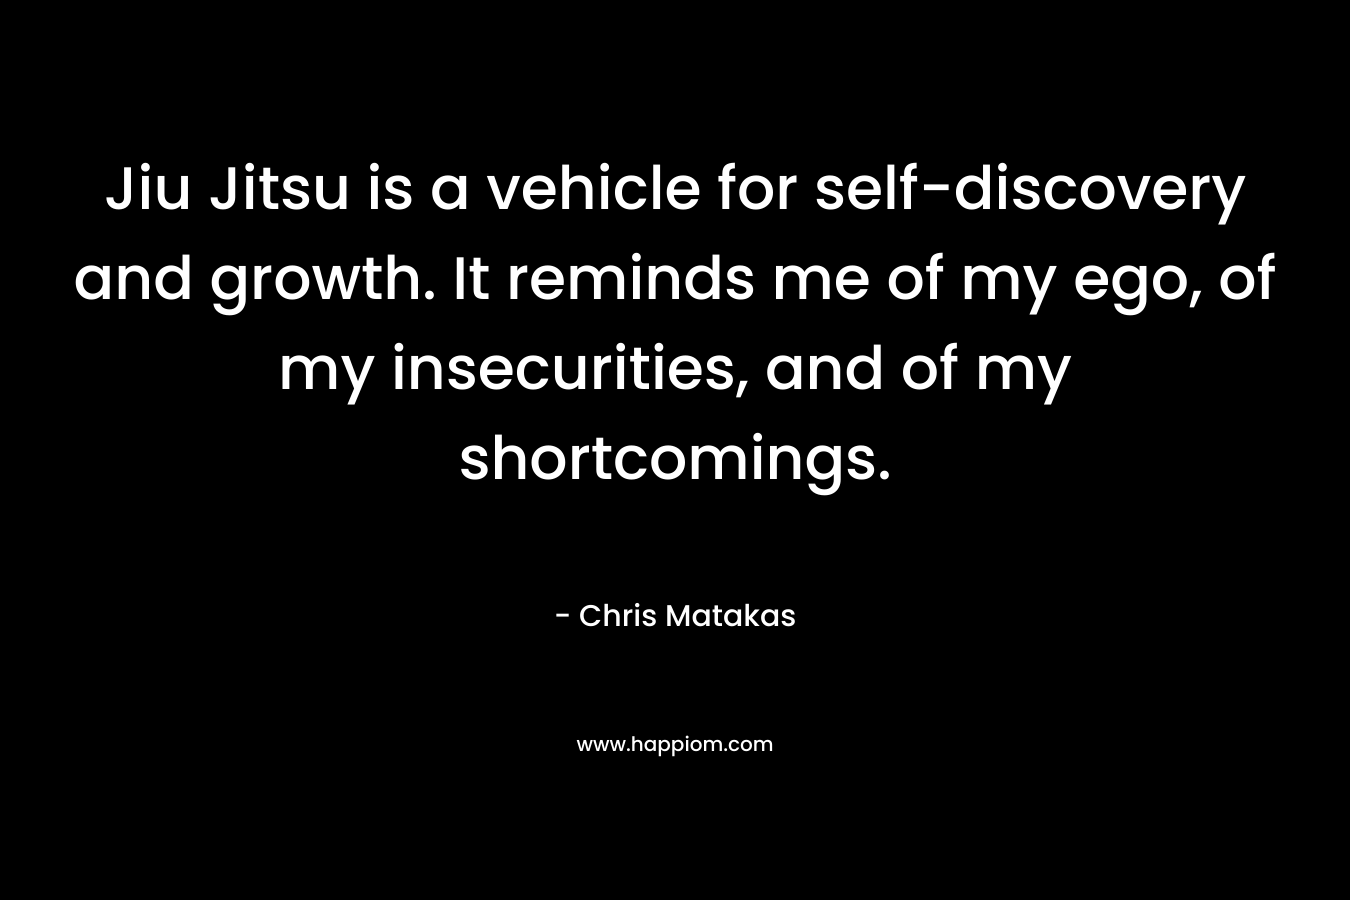 Jiu Jitsu is a vehicle for self-discovery and growth. It reminds me of my ego, of my insecurities, and of my shortcomings.